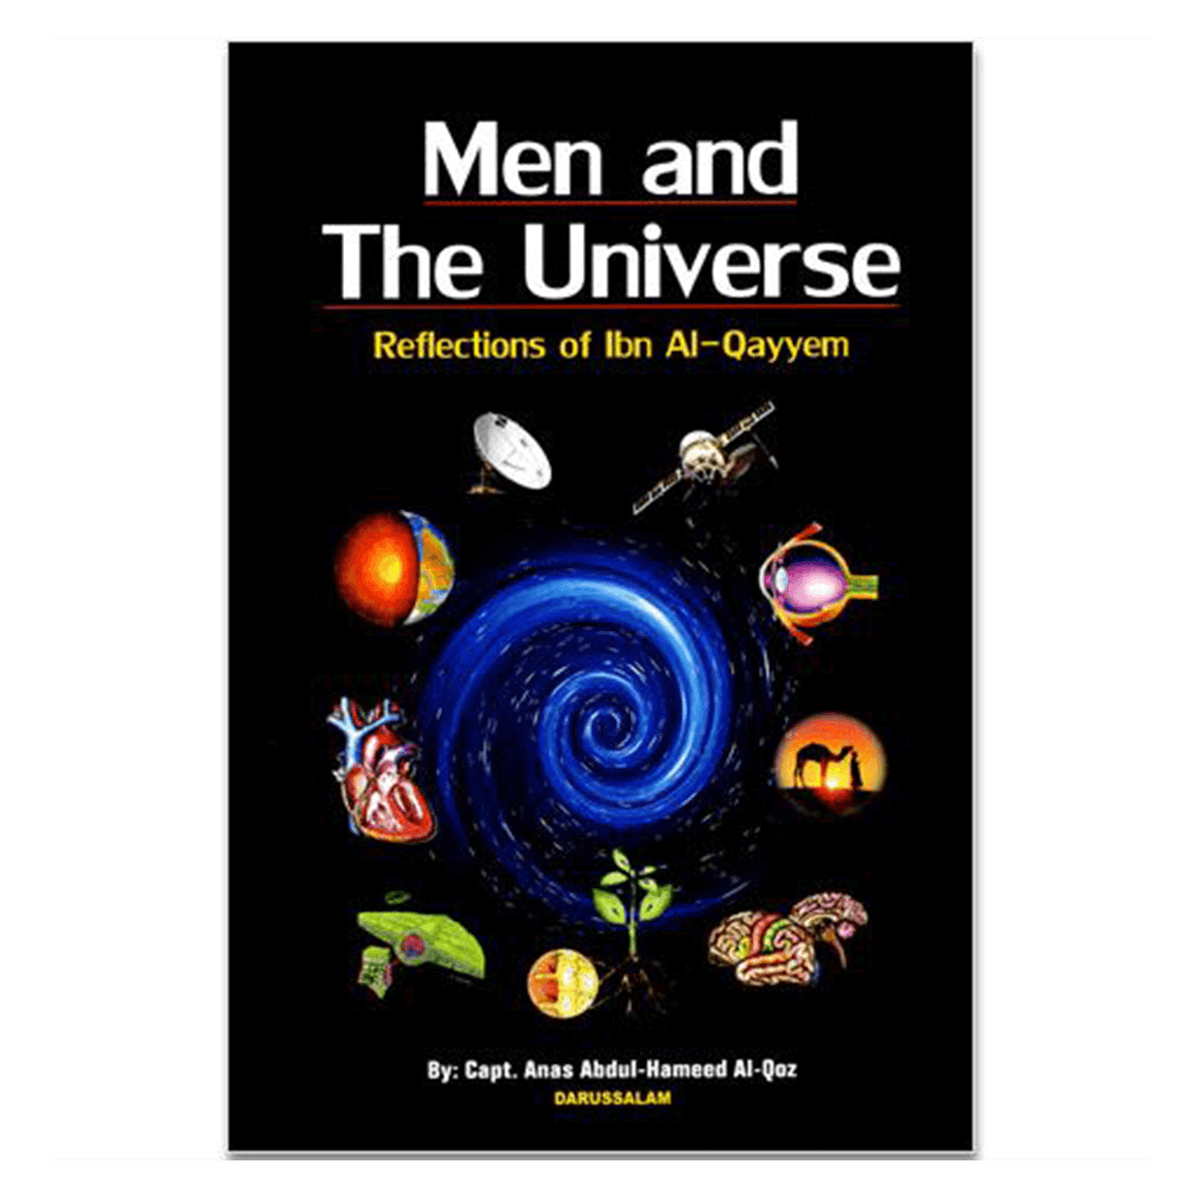 Men and The Universe (Reflection of Ibn Al Qayyem)